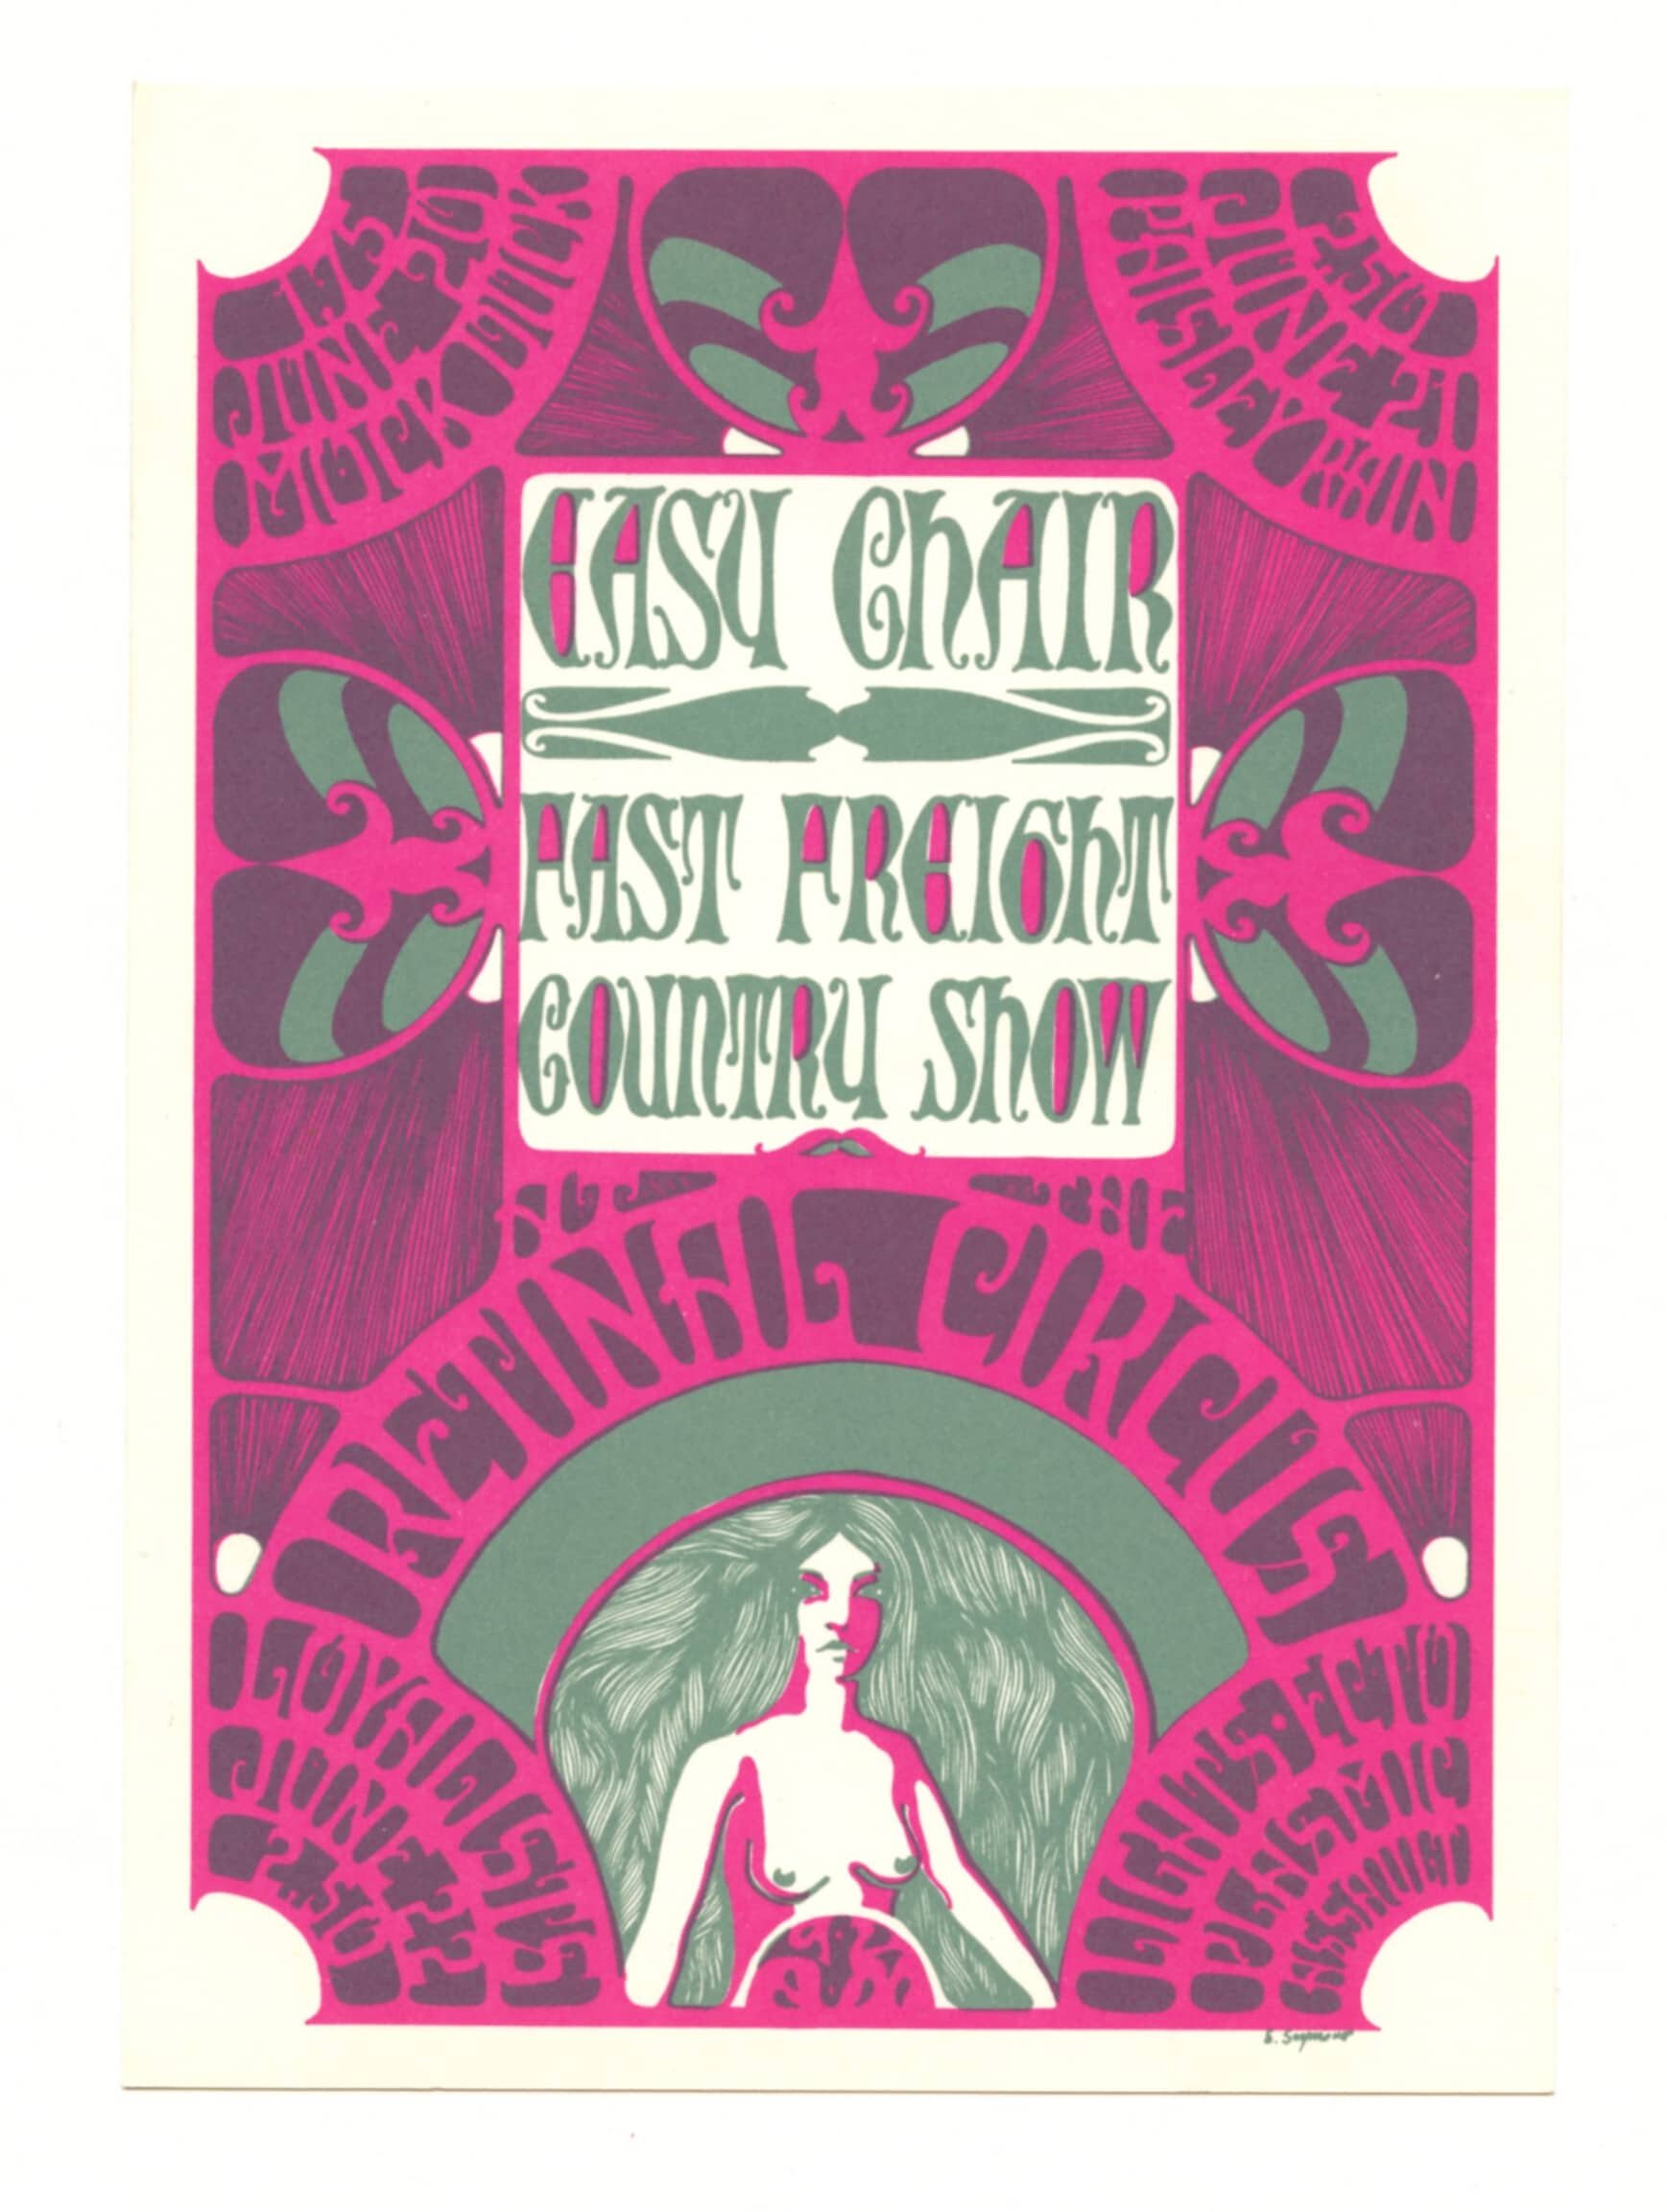 Retinal Circus Postcard 1968 June Easy Chair Fast Freight Country Show Vancouver